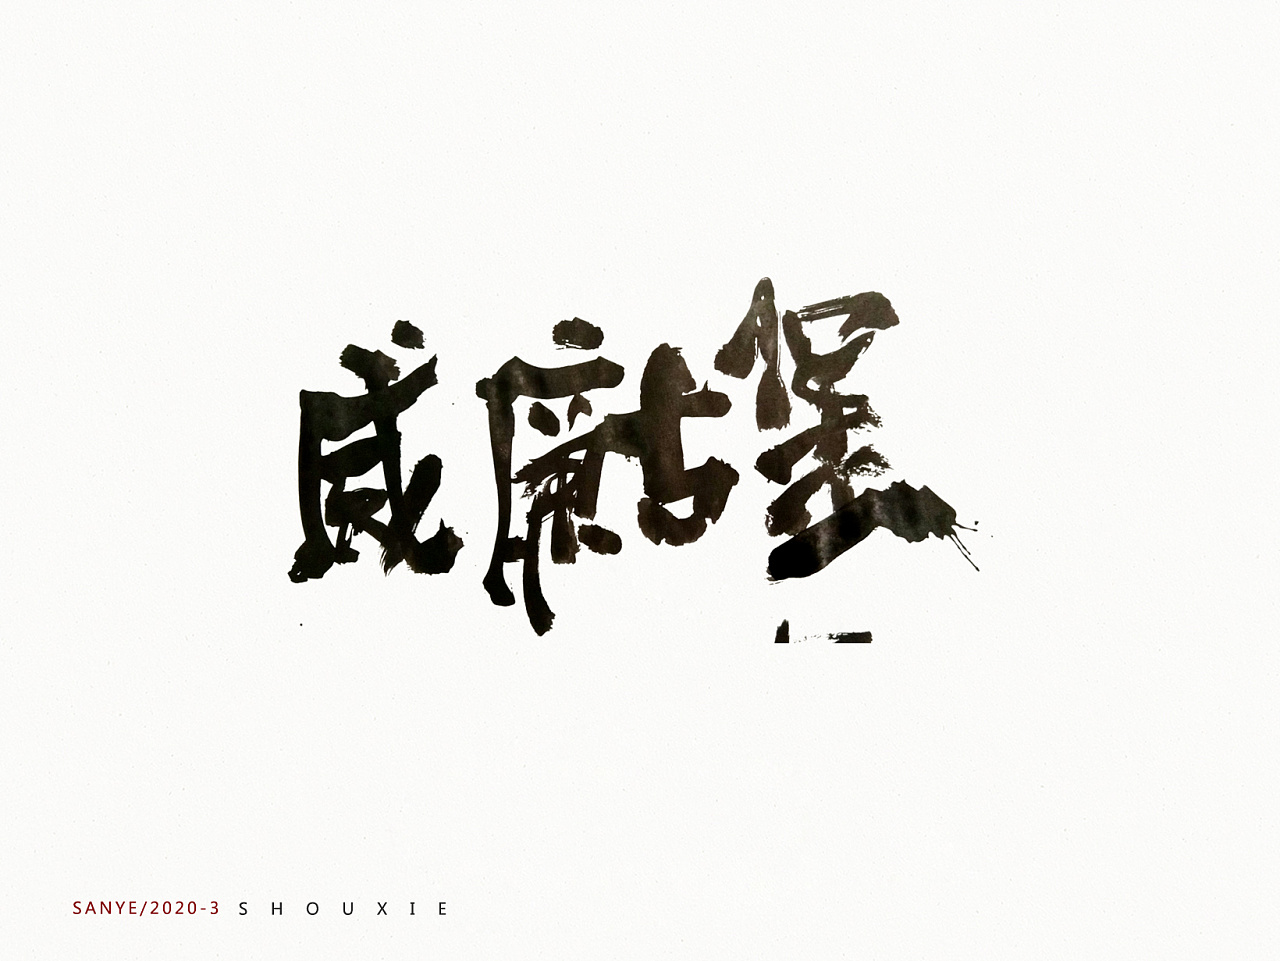 Chinese Creative Font Design-Font Design of a Group of Handwritten Brush